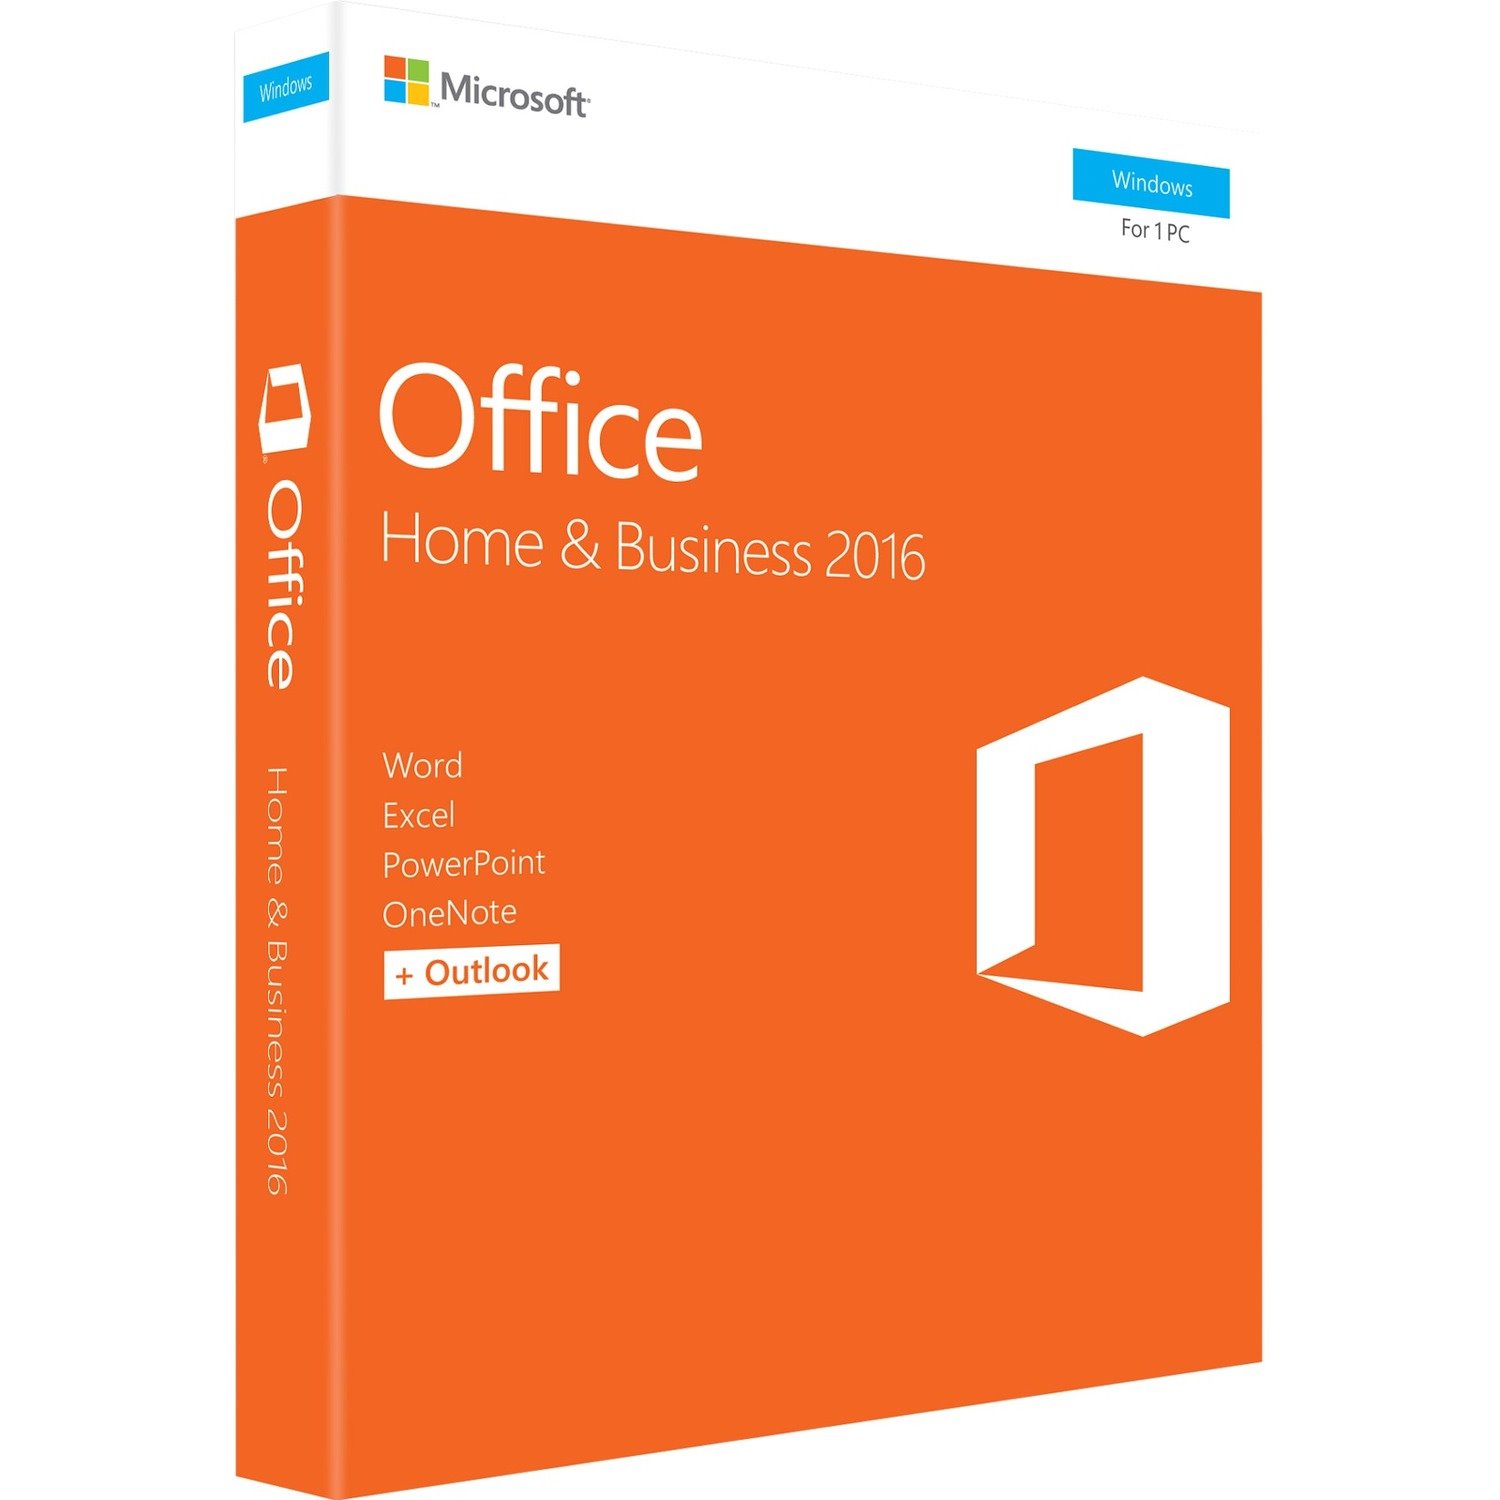 Microsoft- IMSourcing Office 2016 Home & Business - 1 PC